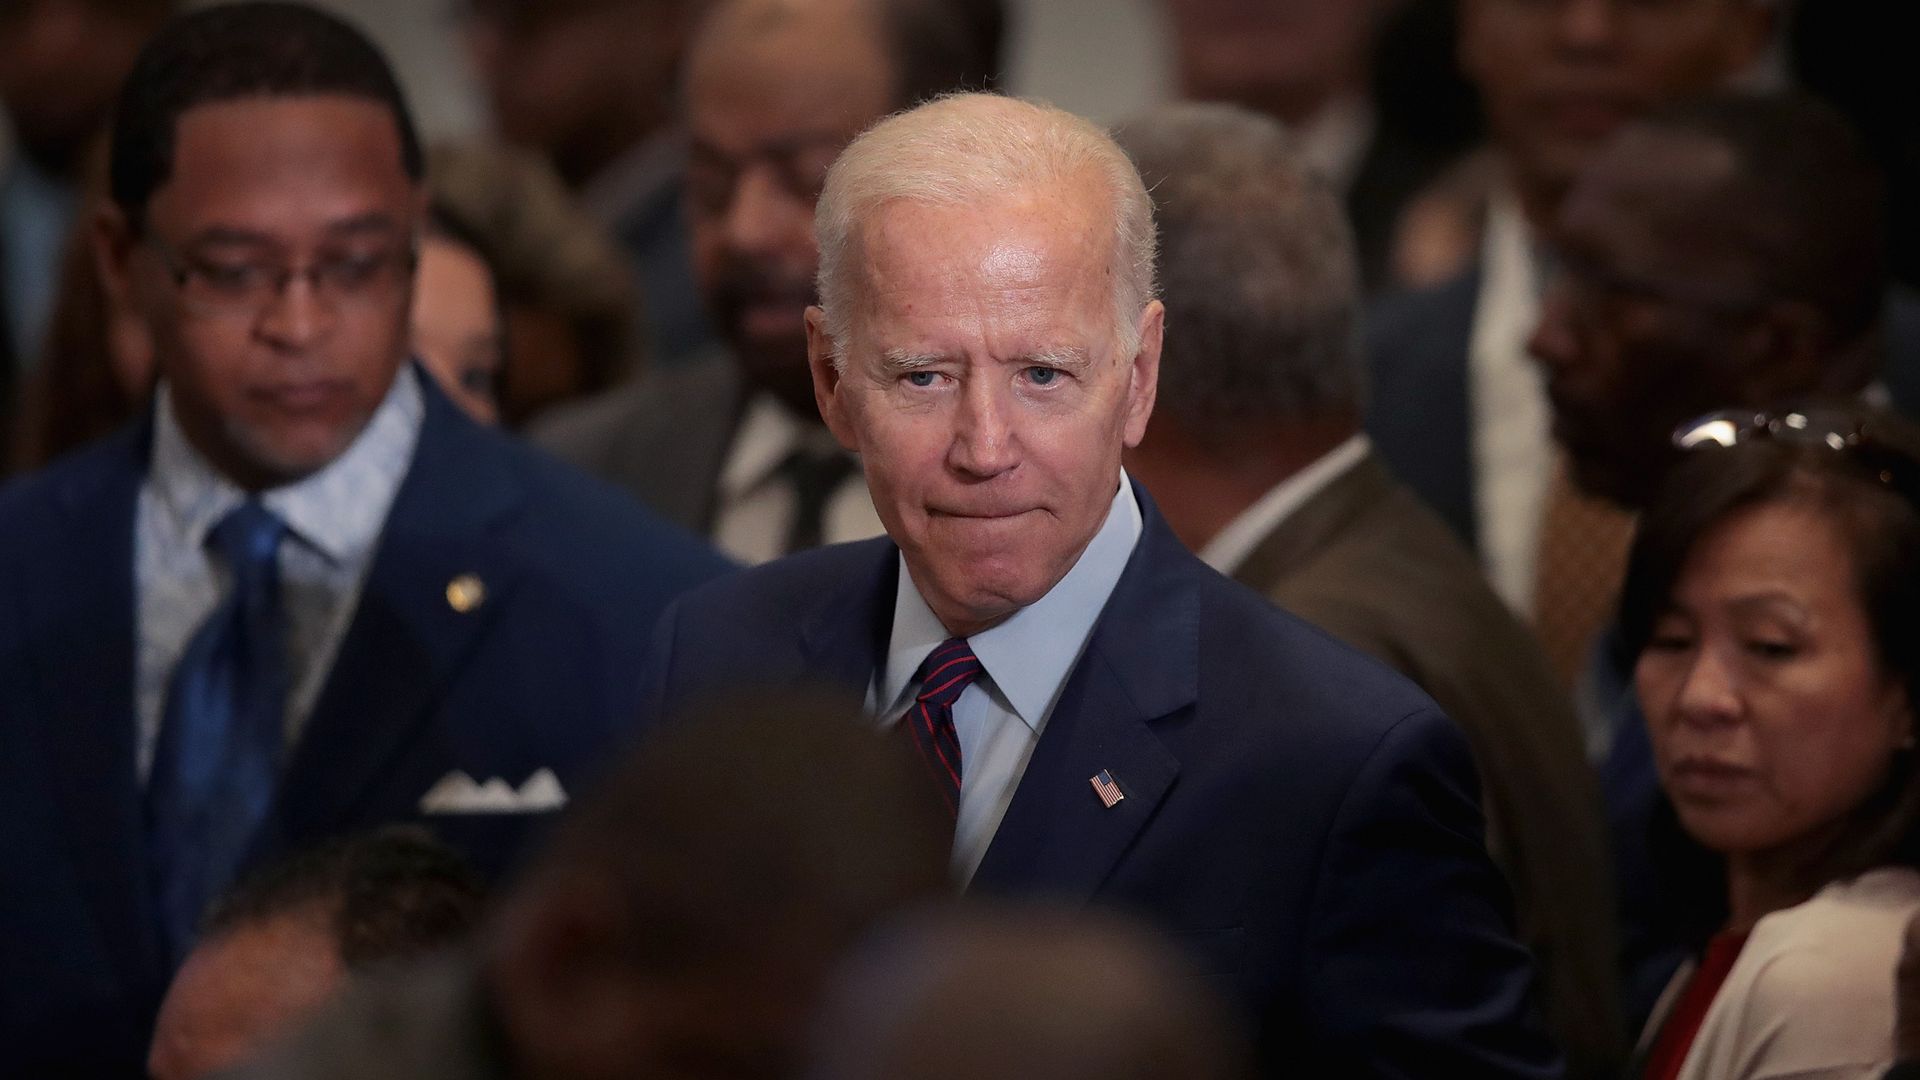 In this image, Biden stands in a crowd. 